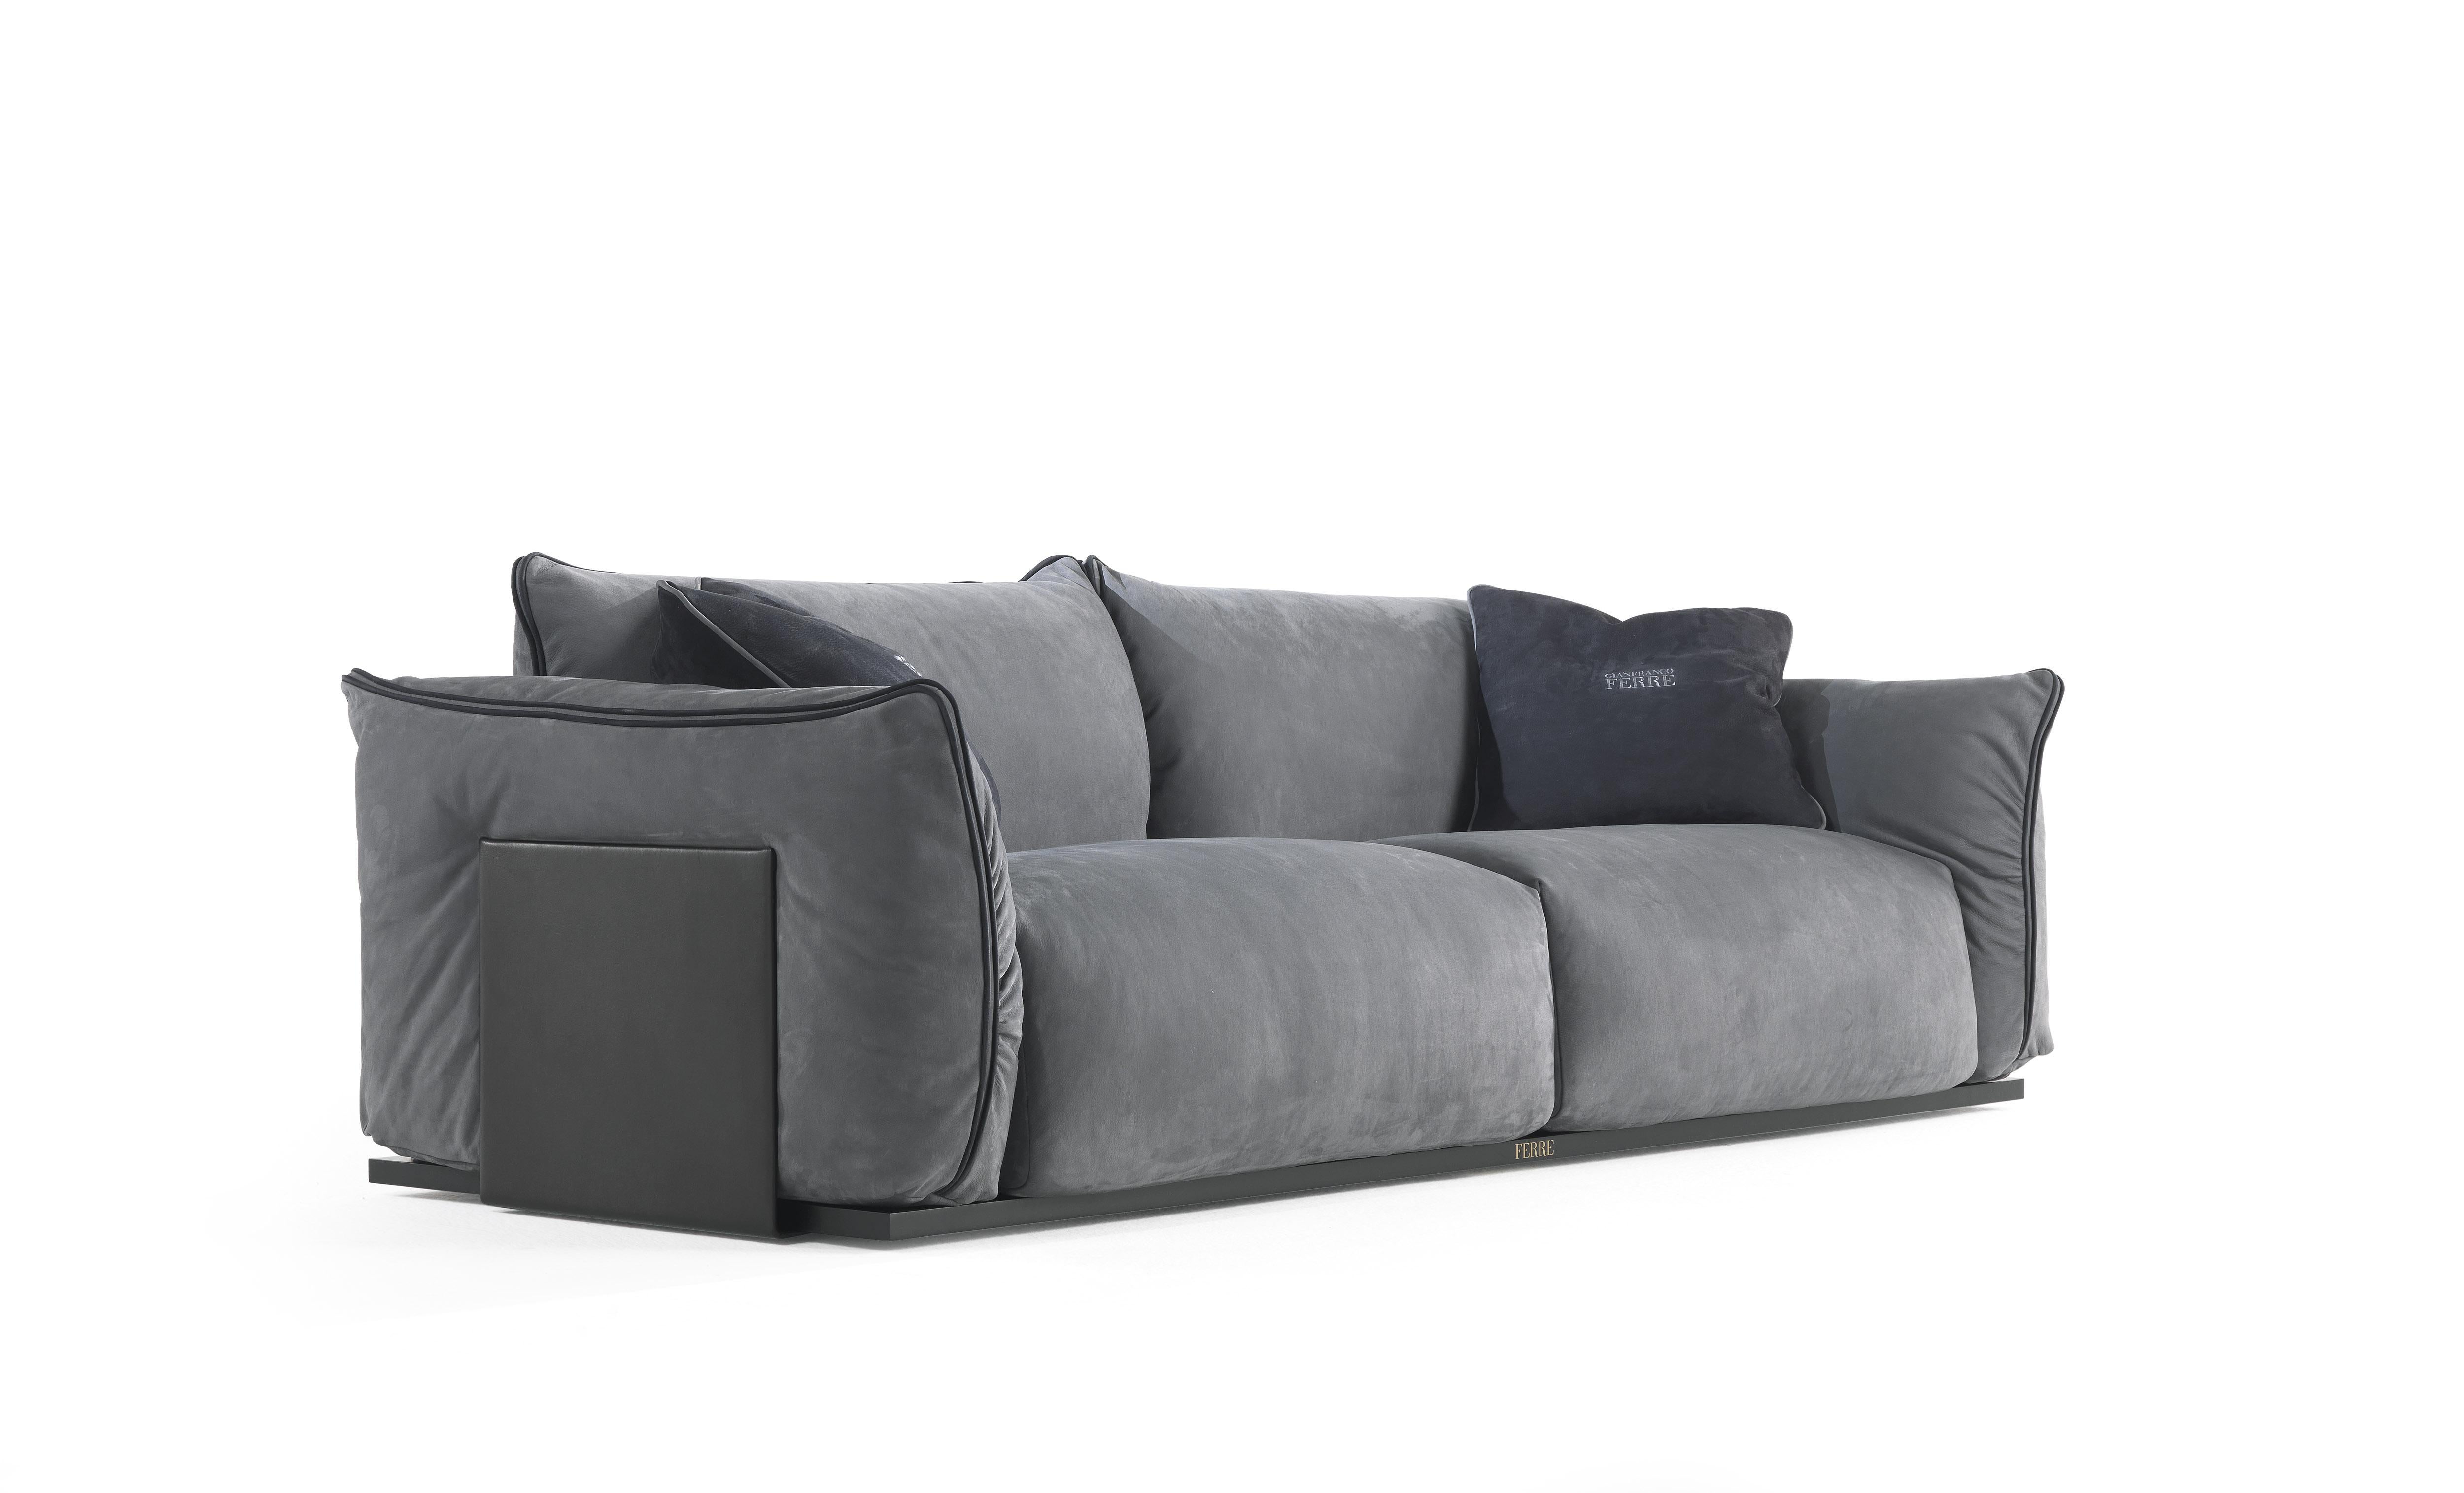 An attractive sofa with a comfortable seat and a contemporary design. The geometric volumes are emphasized by the external plates in metal upholstered leather and by the piping enhancing the profiles of the cushions. The use of leather as privileged